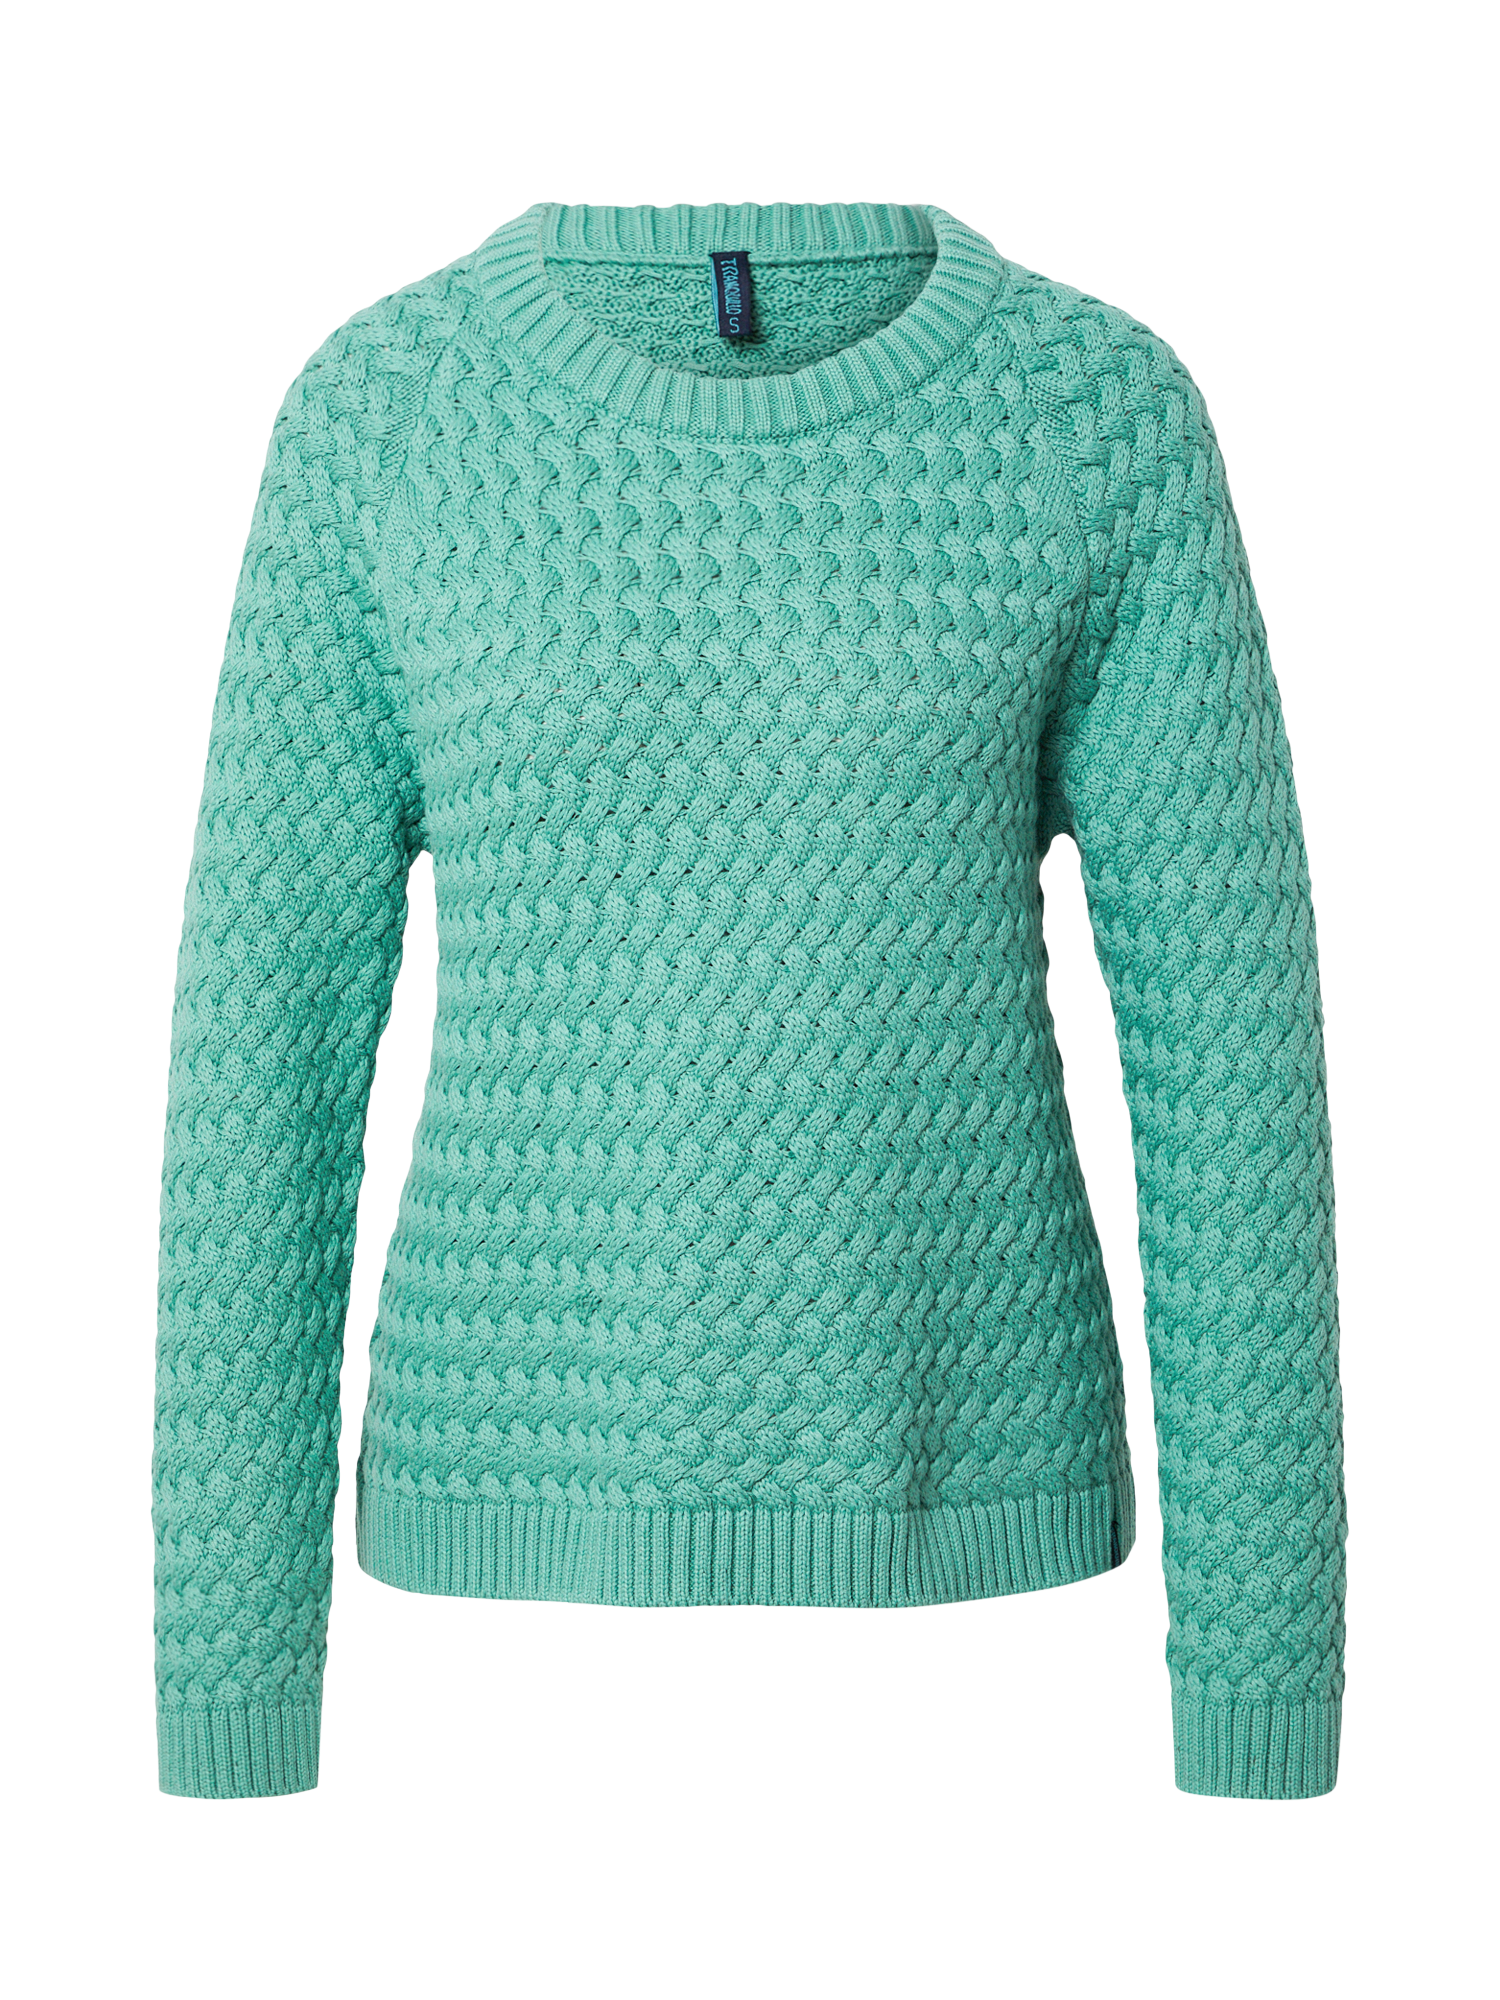 D6grs Donna Tranquillo Pullover in Giada 